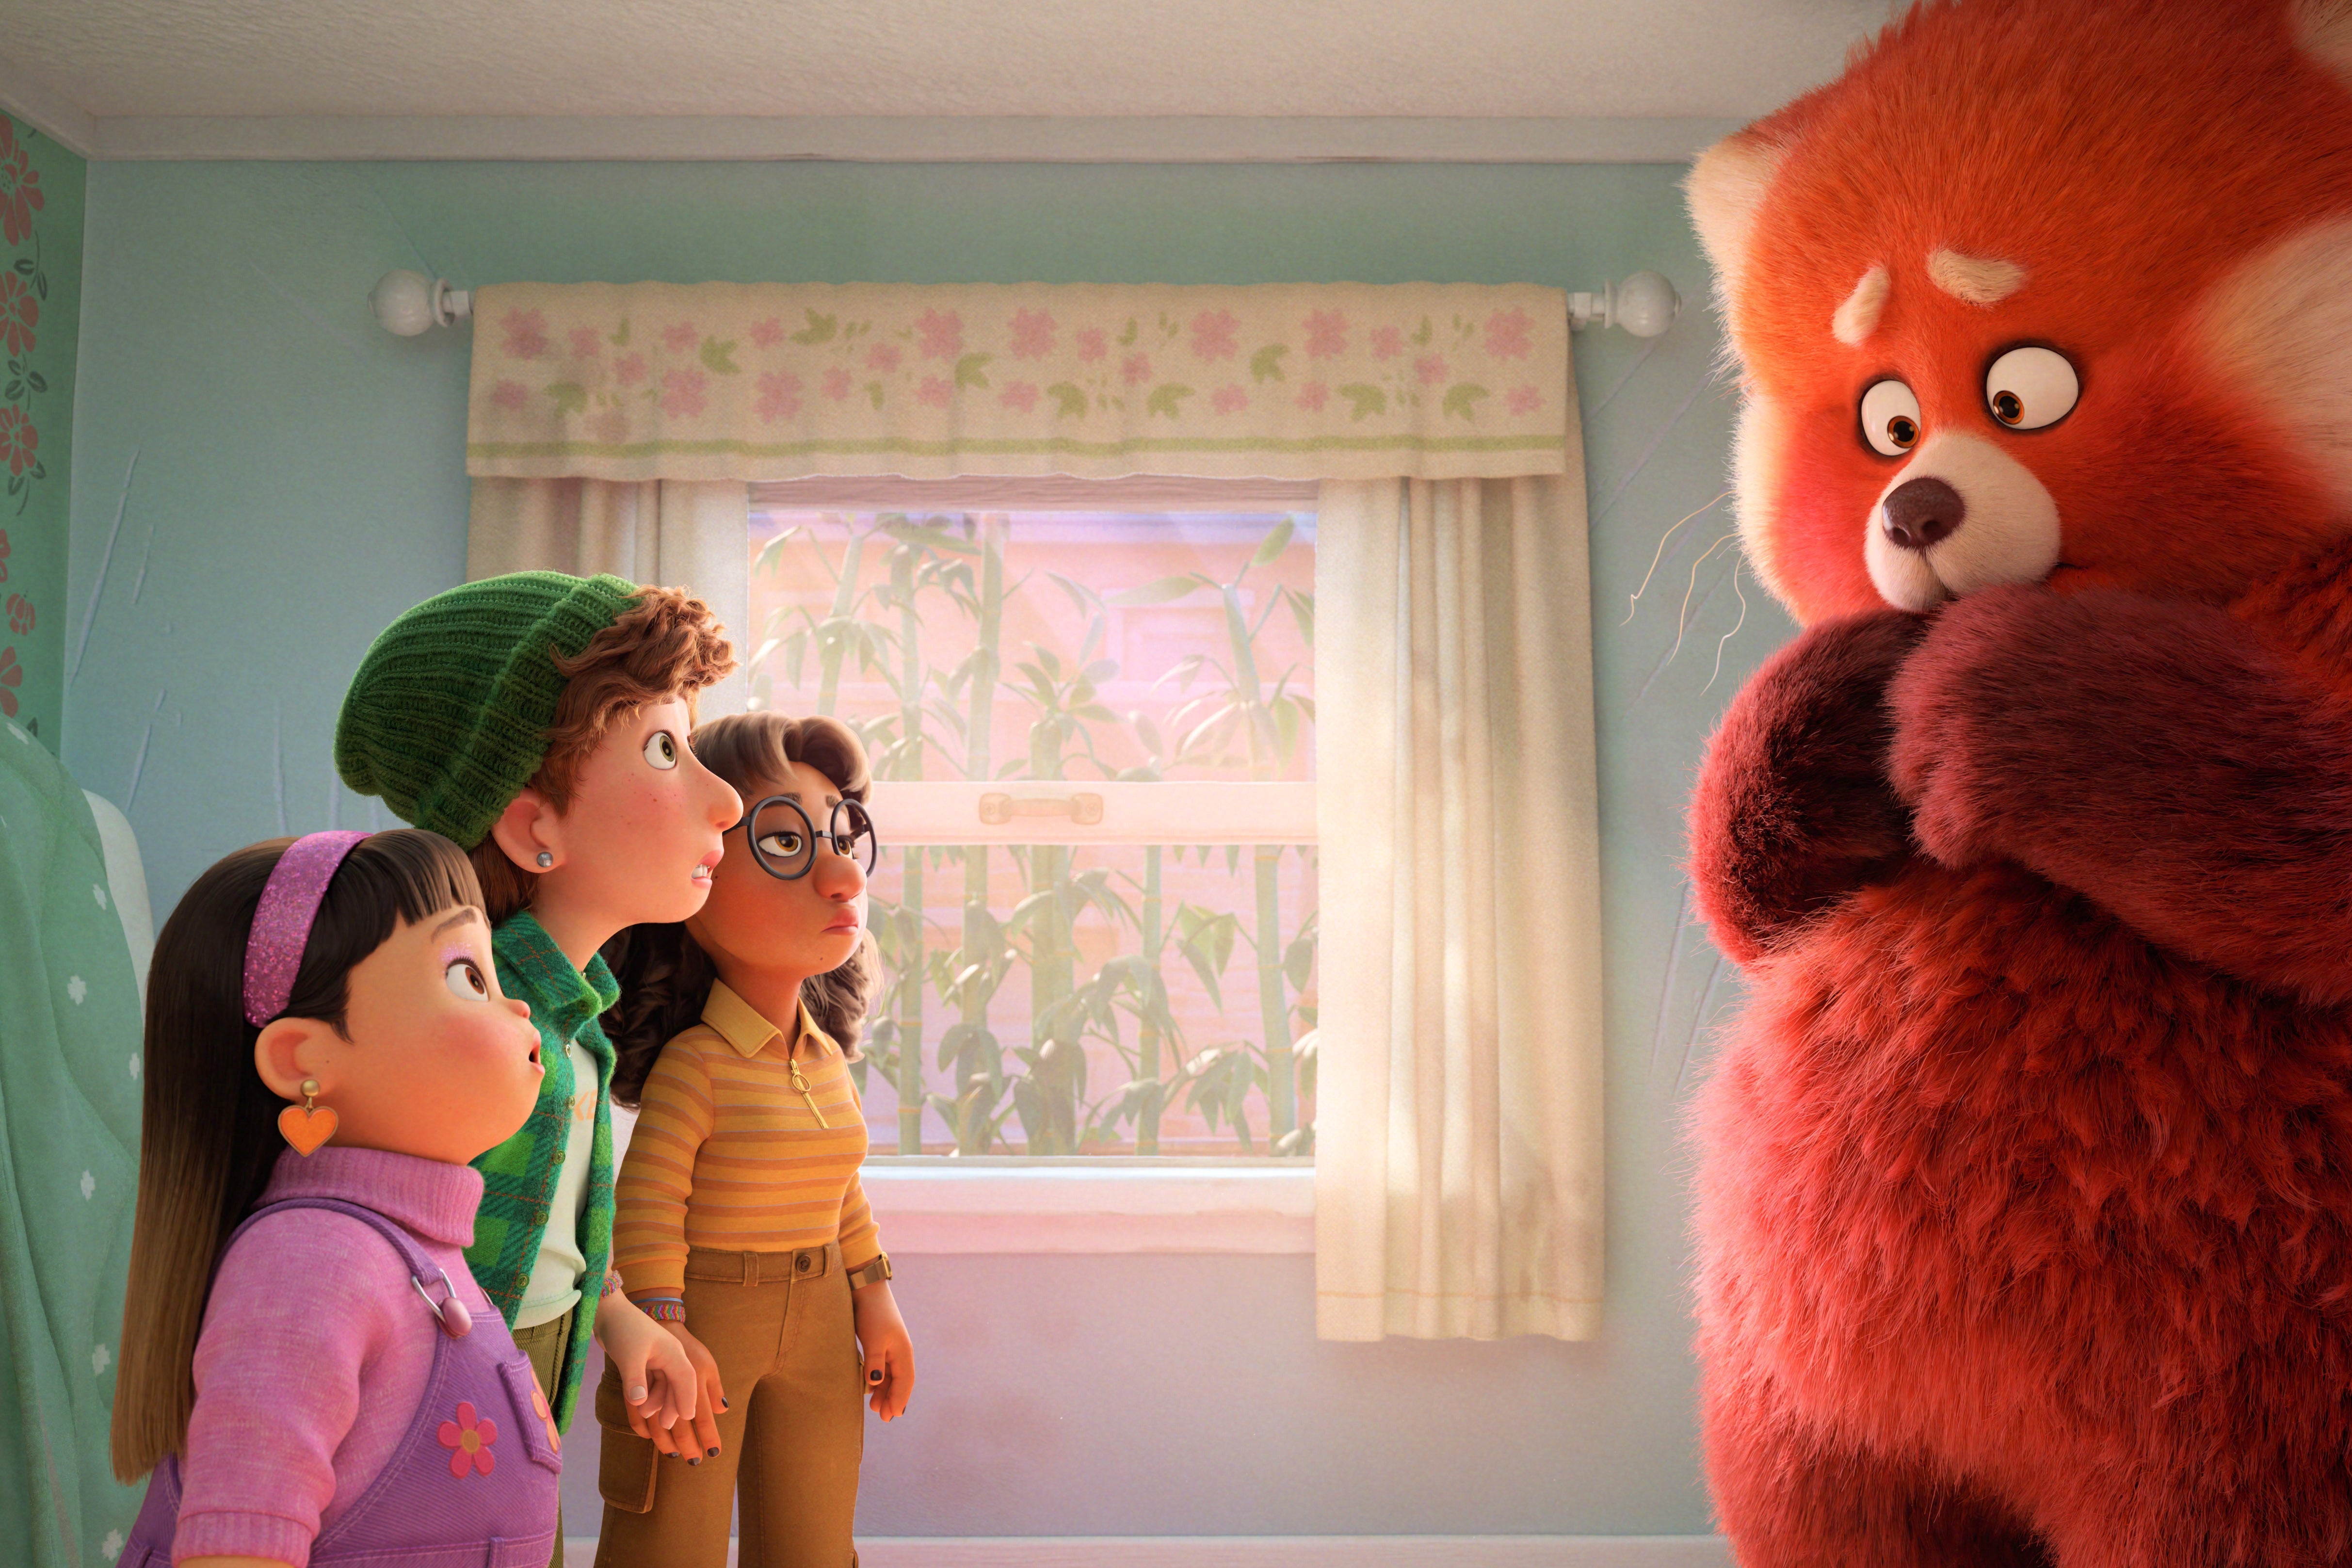 On one side of a pastel-colored bedroom, a diverse trio of computer-animated teenage girls looks up agog. On the other side, a giant red panda, its arms folded in front of it, wishing not to be perceived.